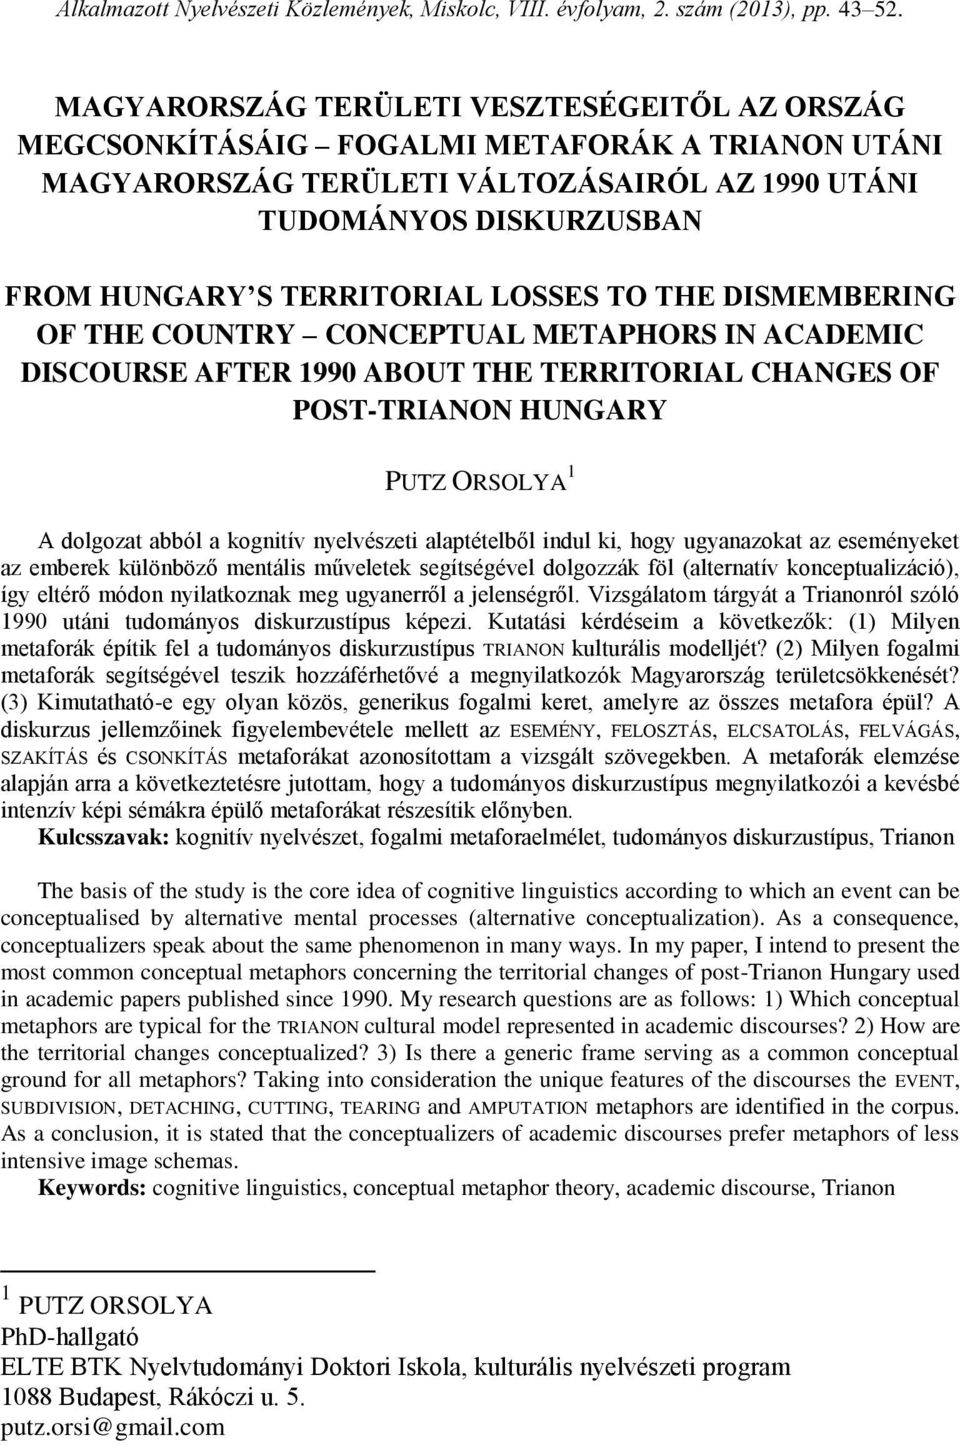 LOSSES TO THE DISMEMBERING OF THE COUNTRY CONCEPTUAL METAPHORS IN ACADEMIC DISCOURSE AFTER 1990 ABOUT THE TERRITORIAL CHANGES OF POST-TRIANON HUNGARY PUTZ ORSOLYA 1 A dolgozat abból a kognitív